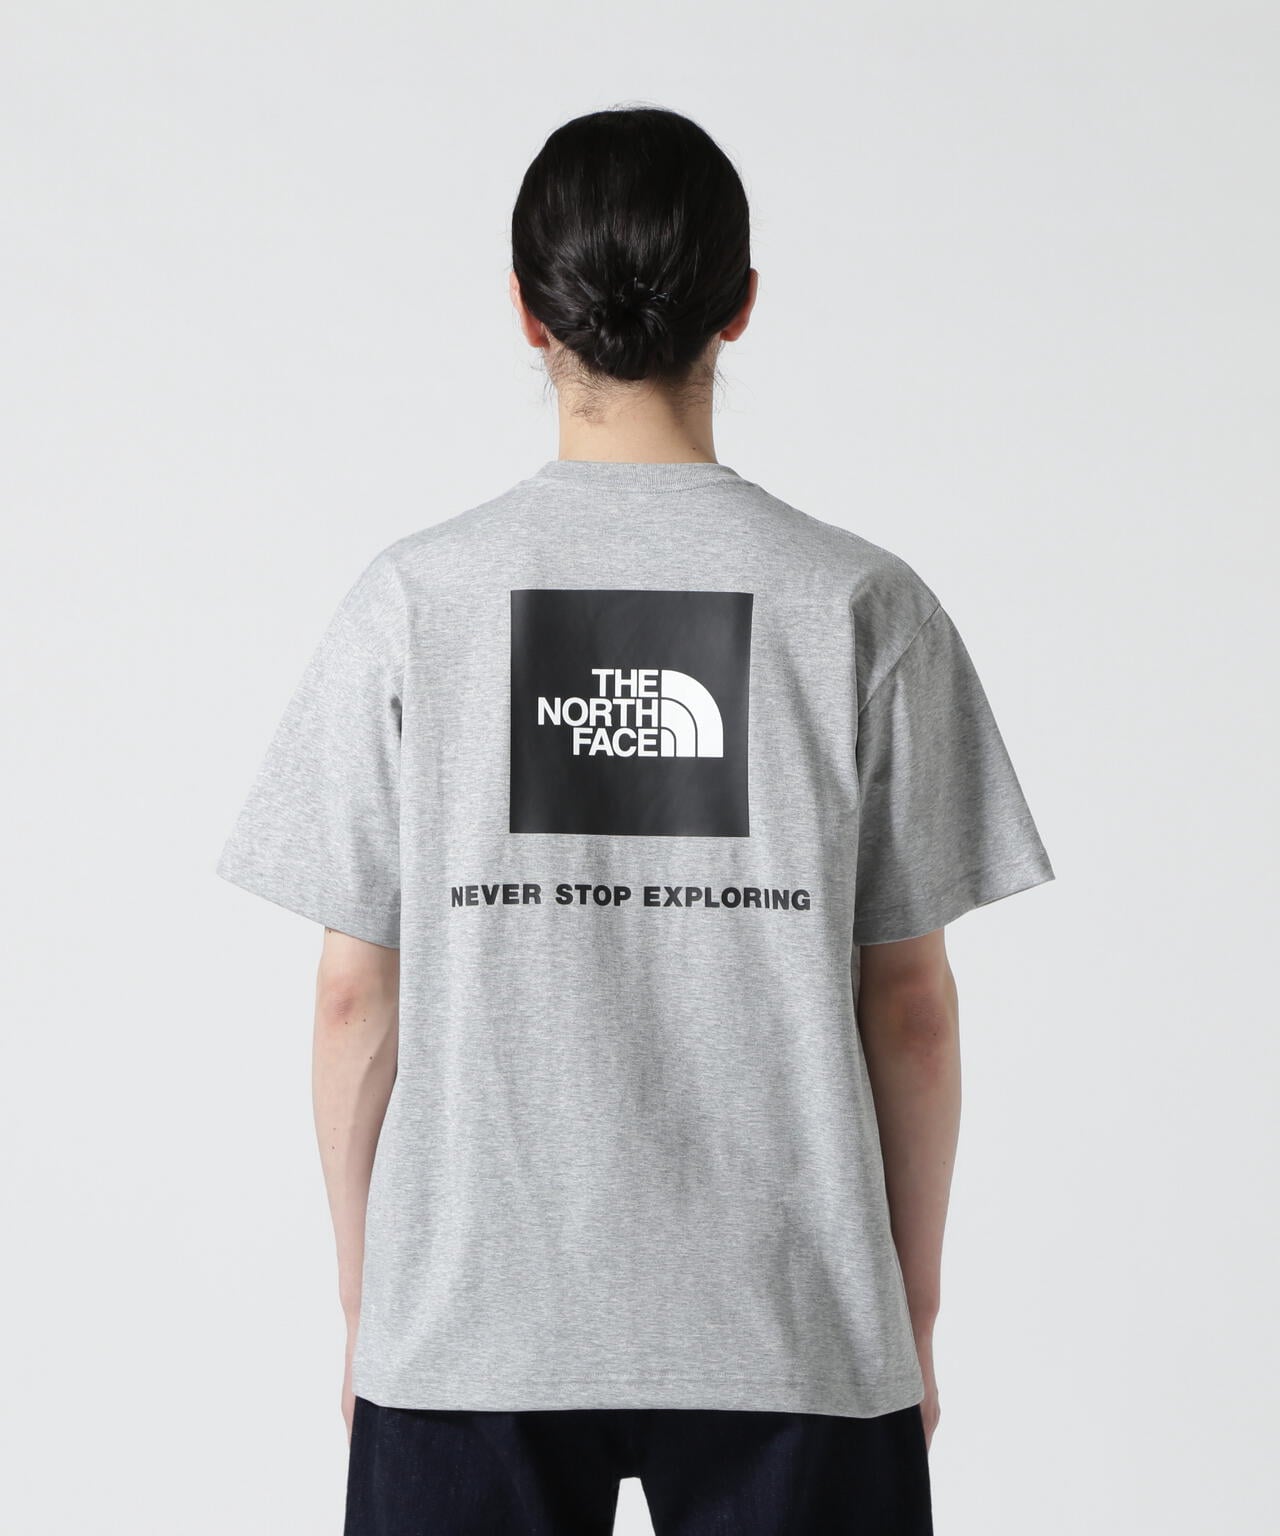 THE NORTH FACE/ザ・ノースフェイス S/S Back Square Logo Tee ...